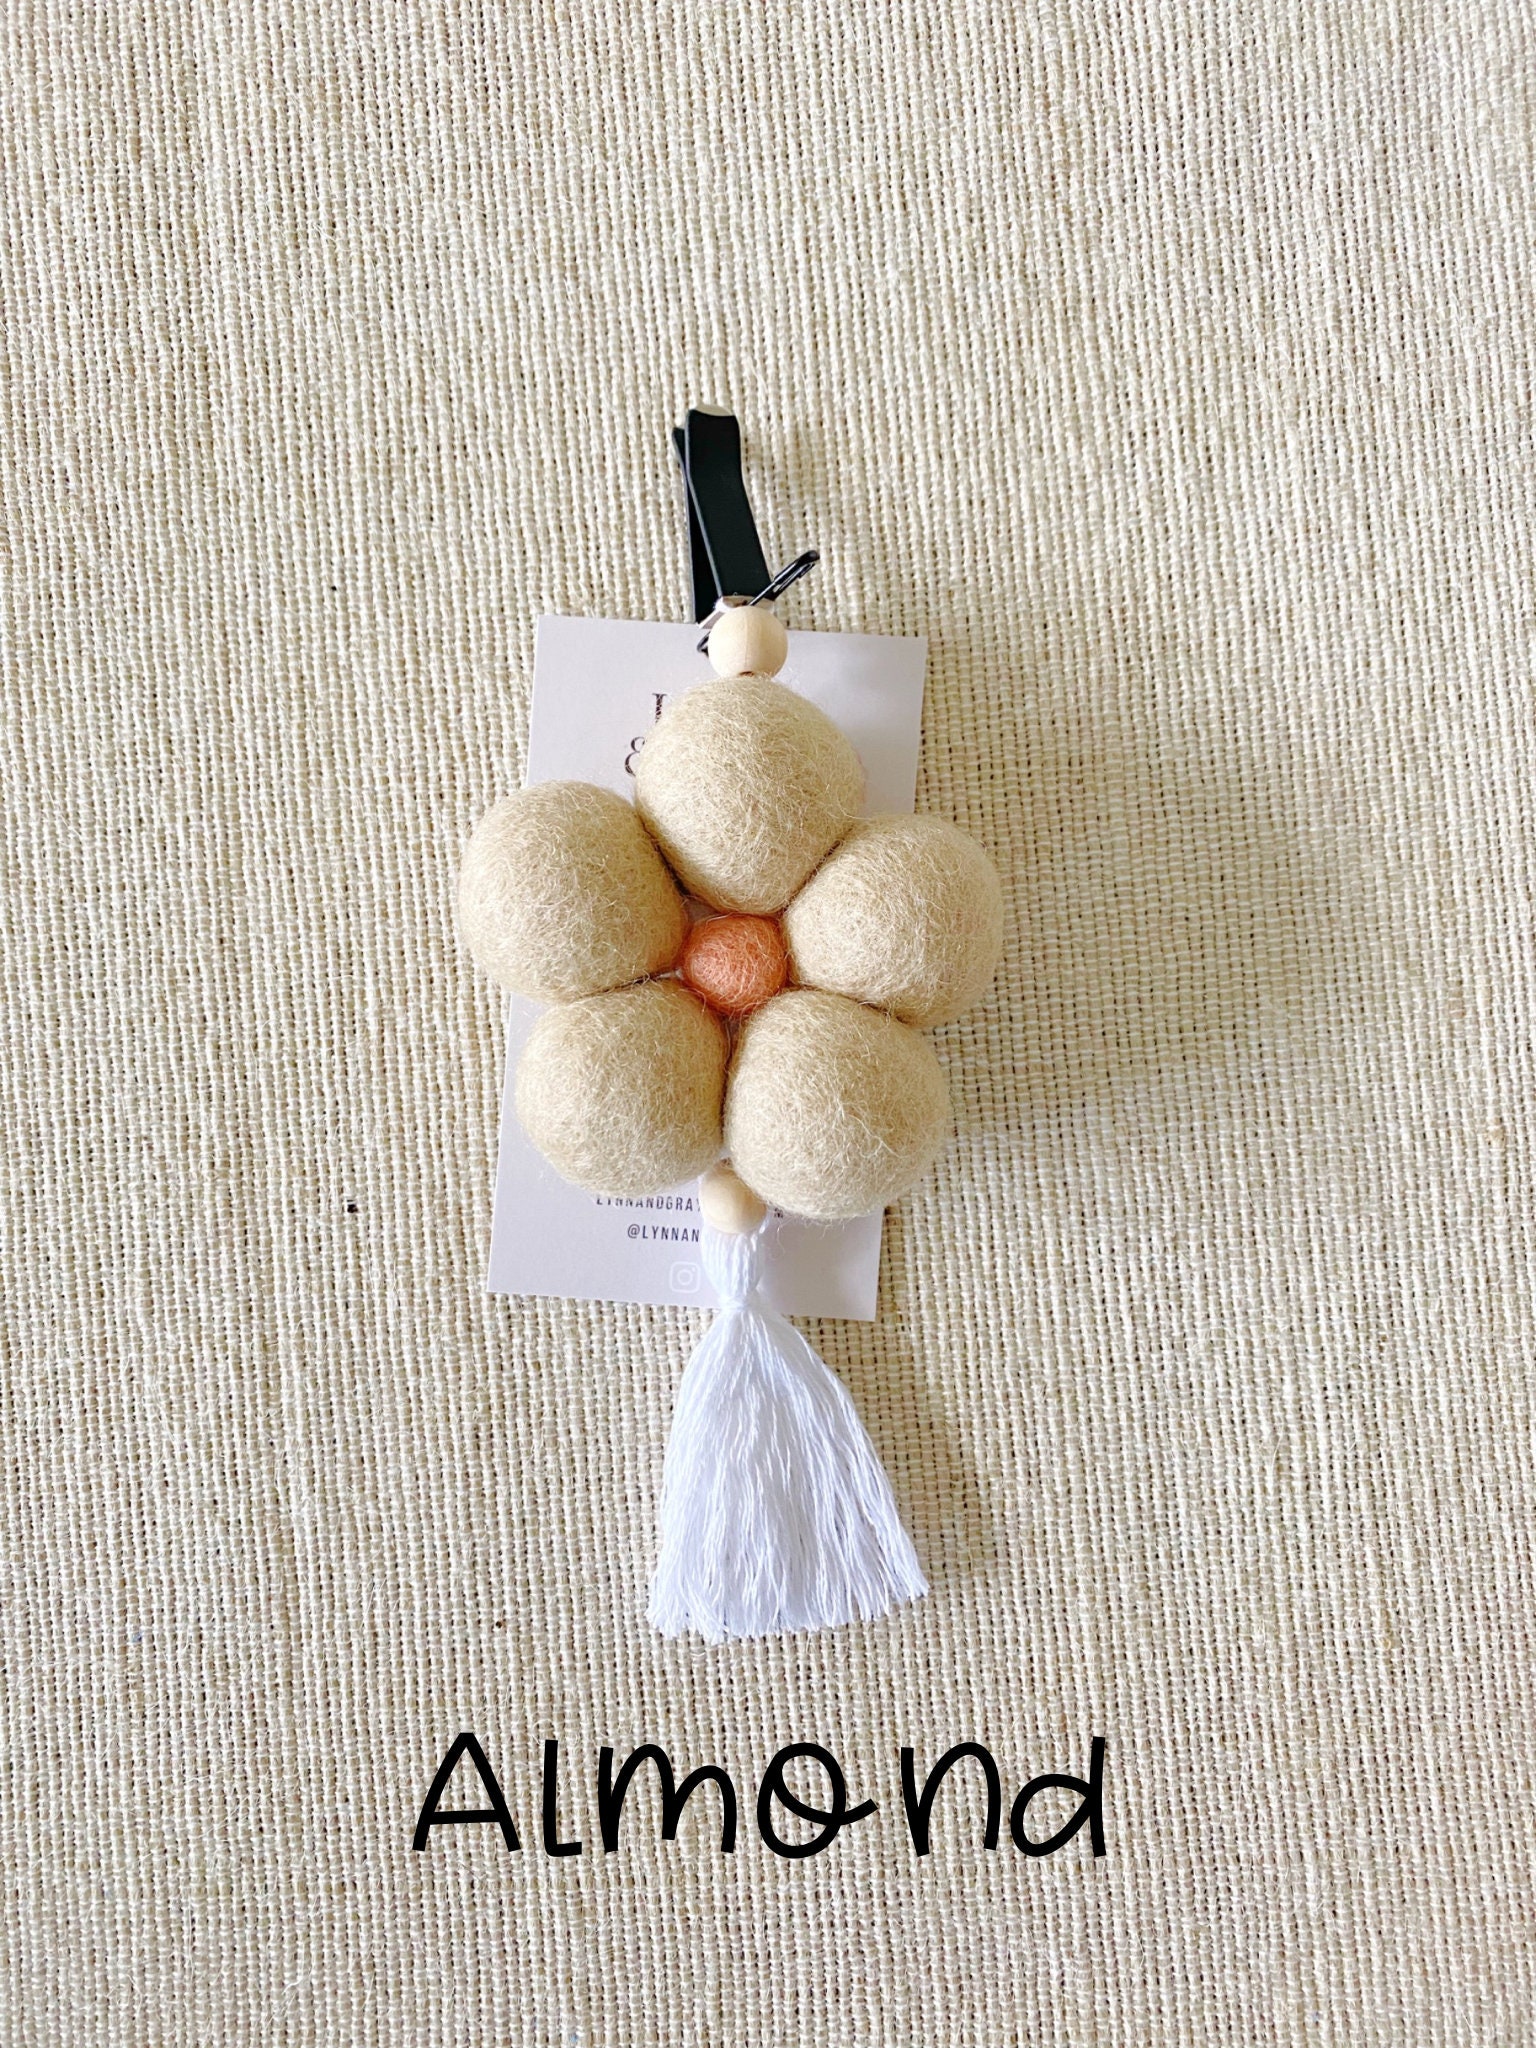 Easy Wool Ball Diffuser For Your Car! - A Beautiful Mess